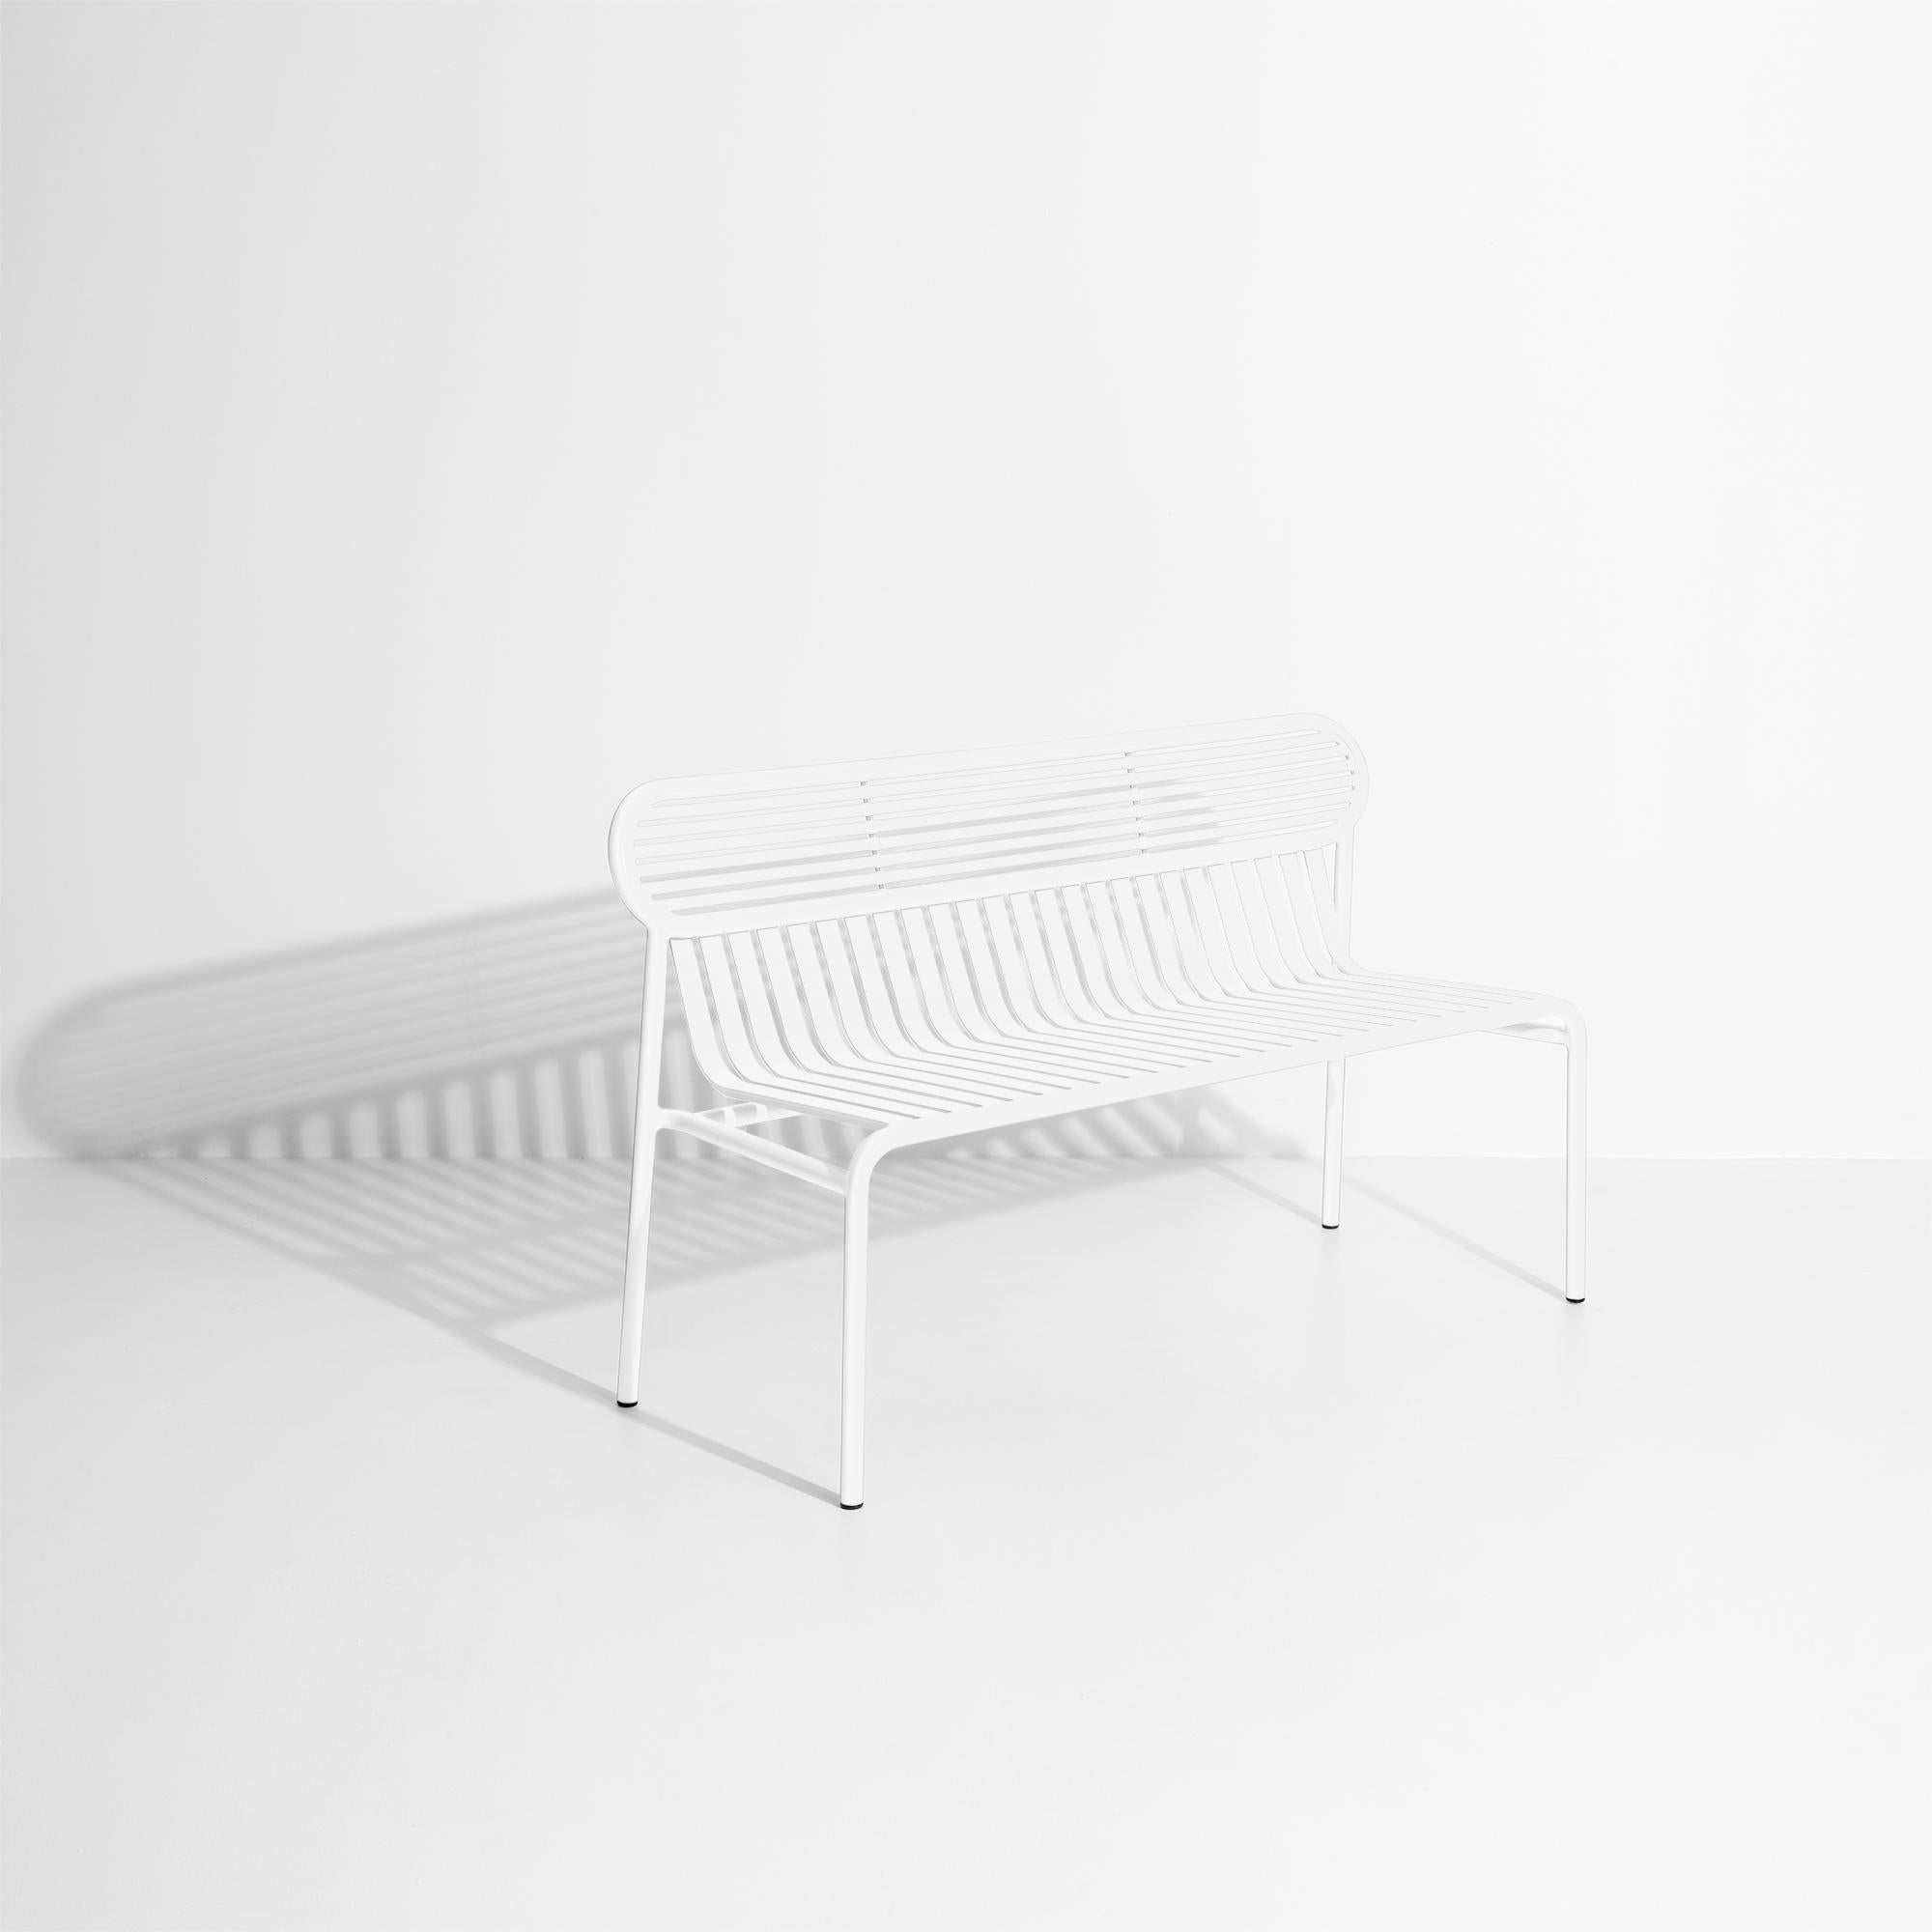 Petite Friture Week-End Bench in White Aluminium by Studio BrichetZiegler In New Condition For Sale In Brooklyn, NY